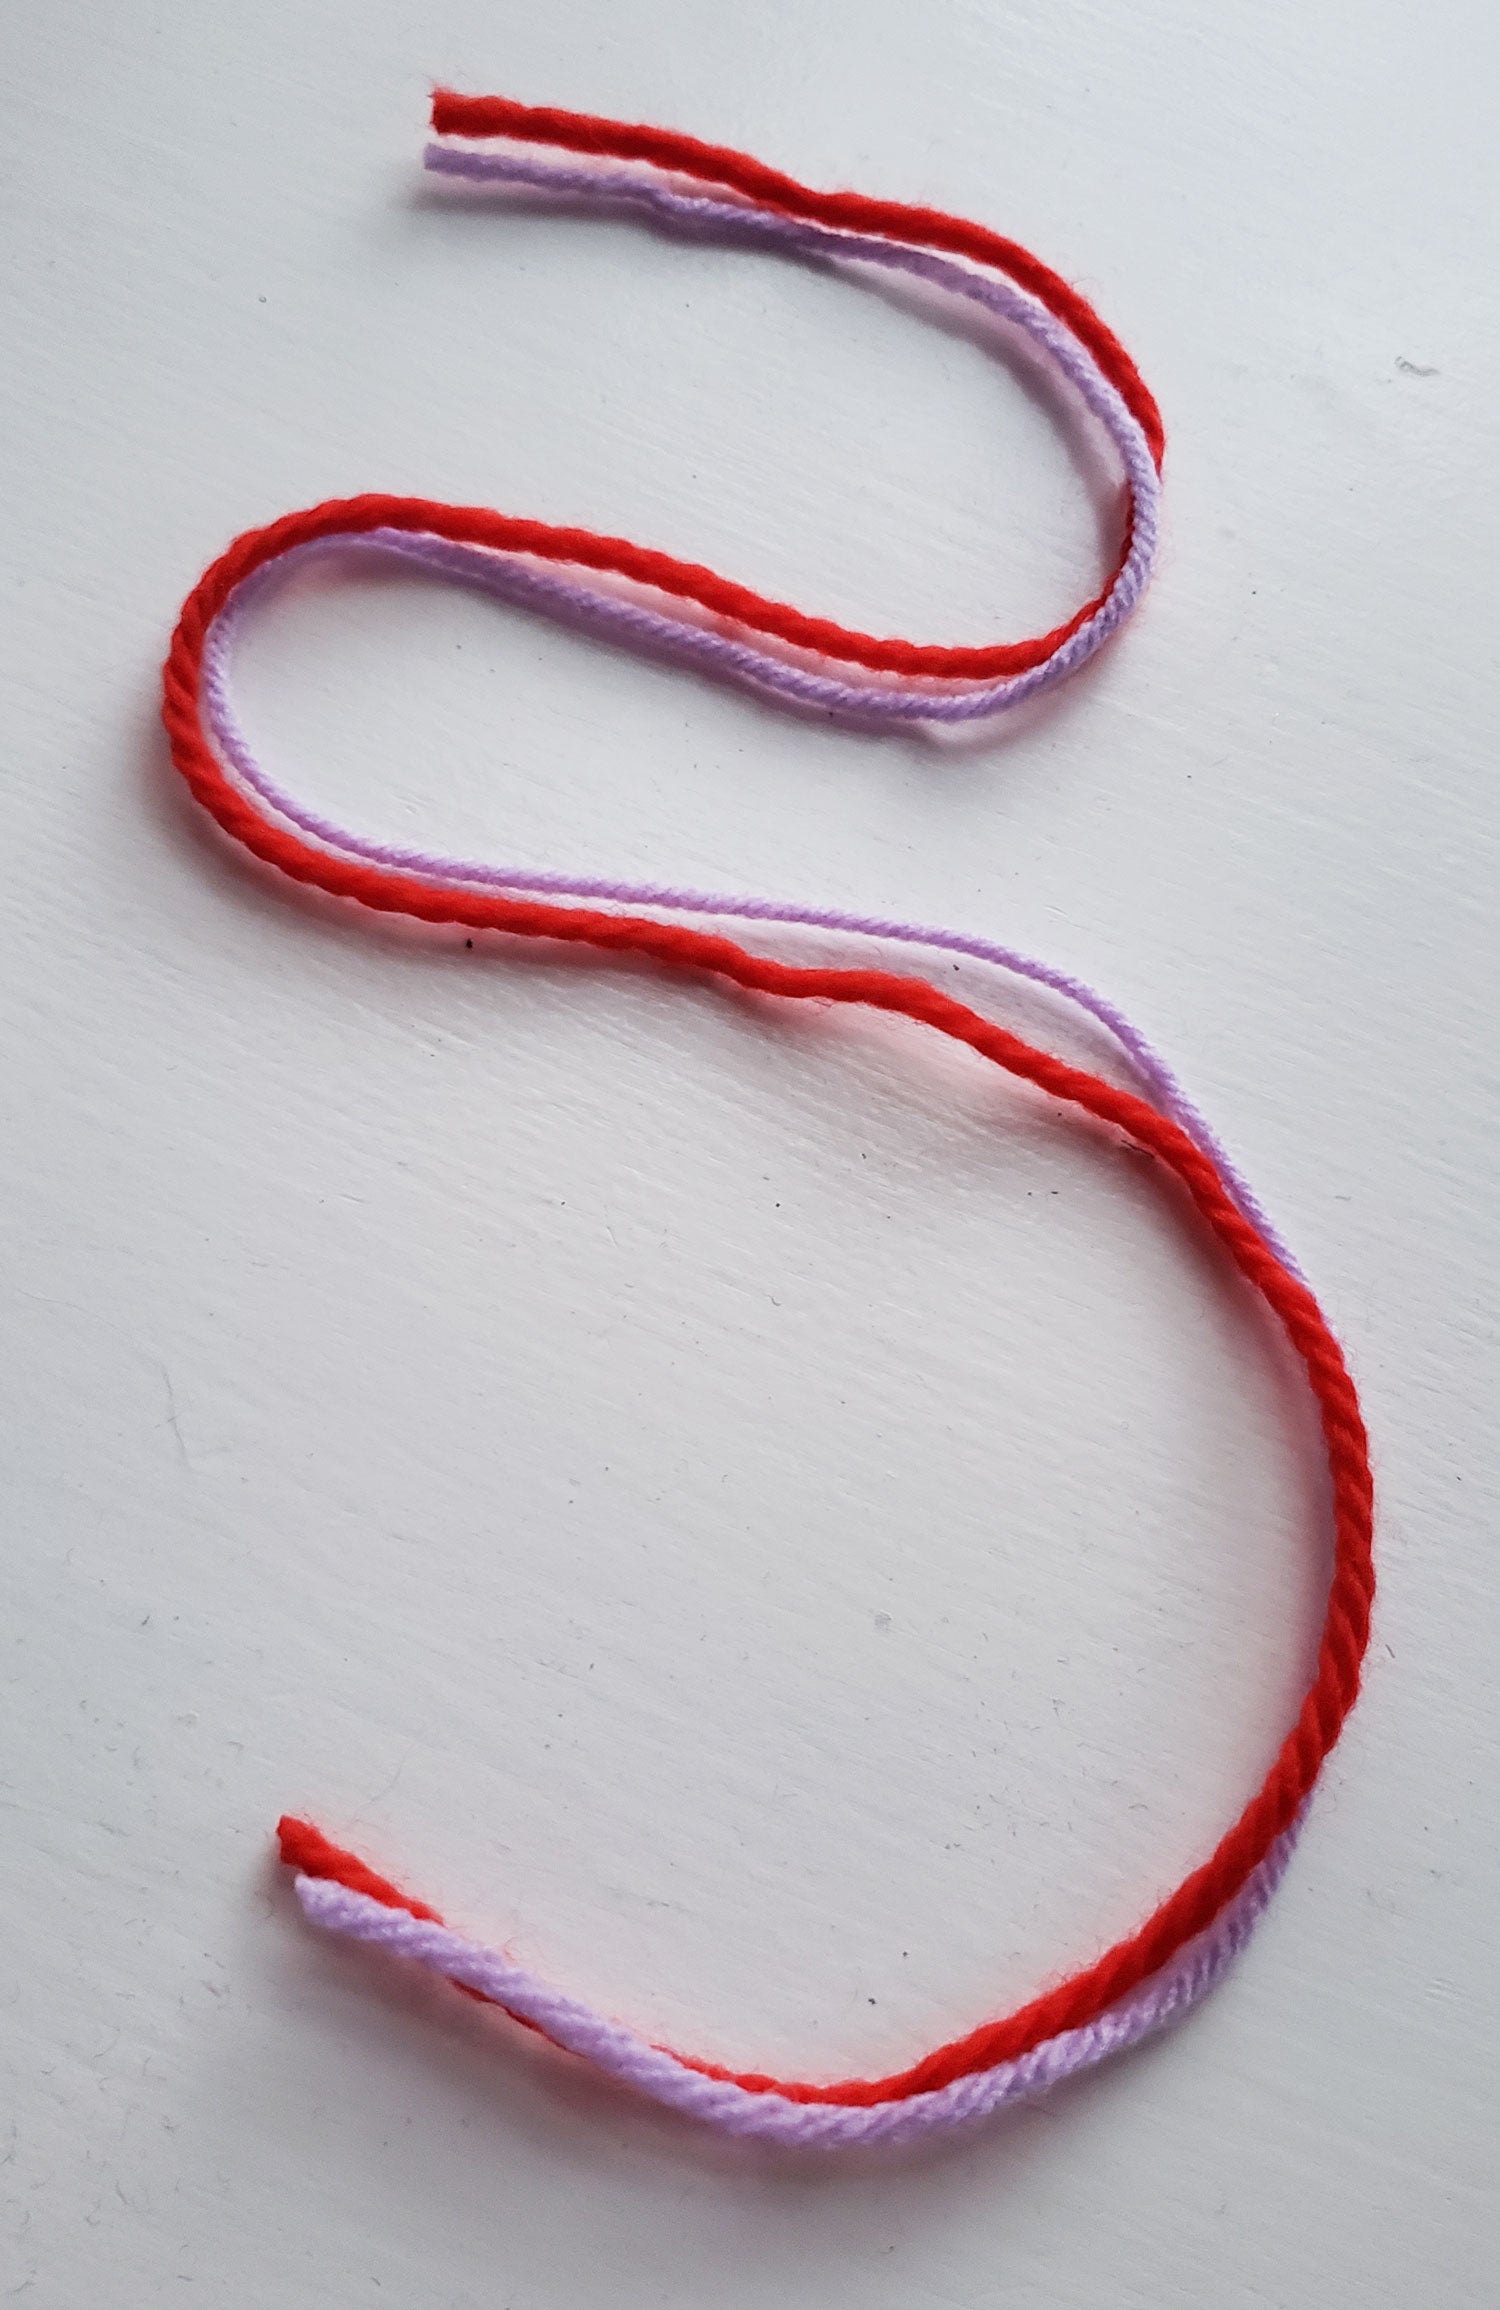 A length of two yarns